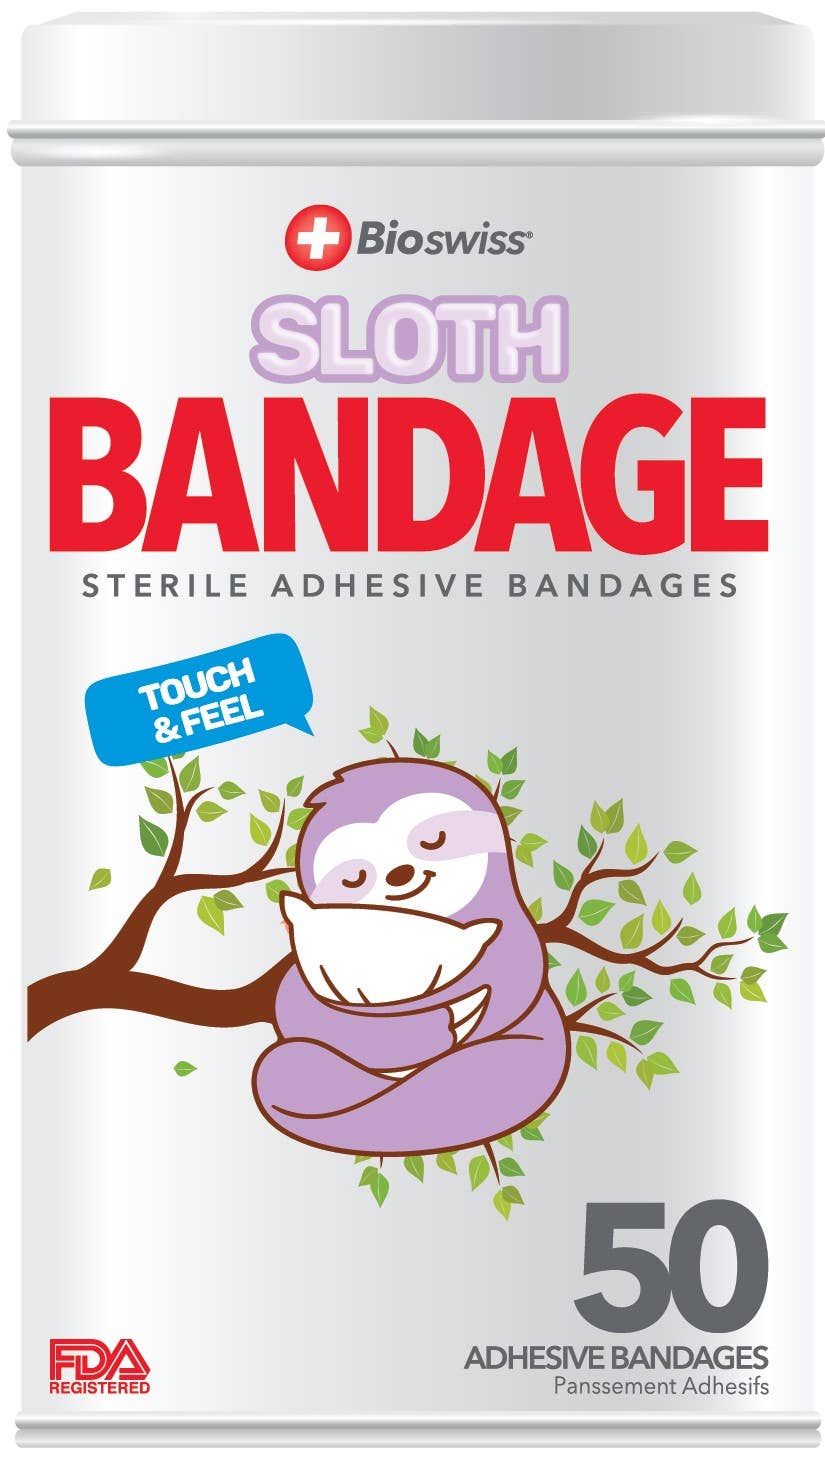 SLOTH BANDAGES IN TIN CAN PACKAGING